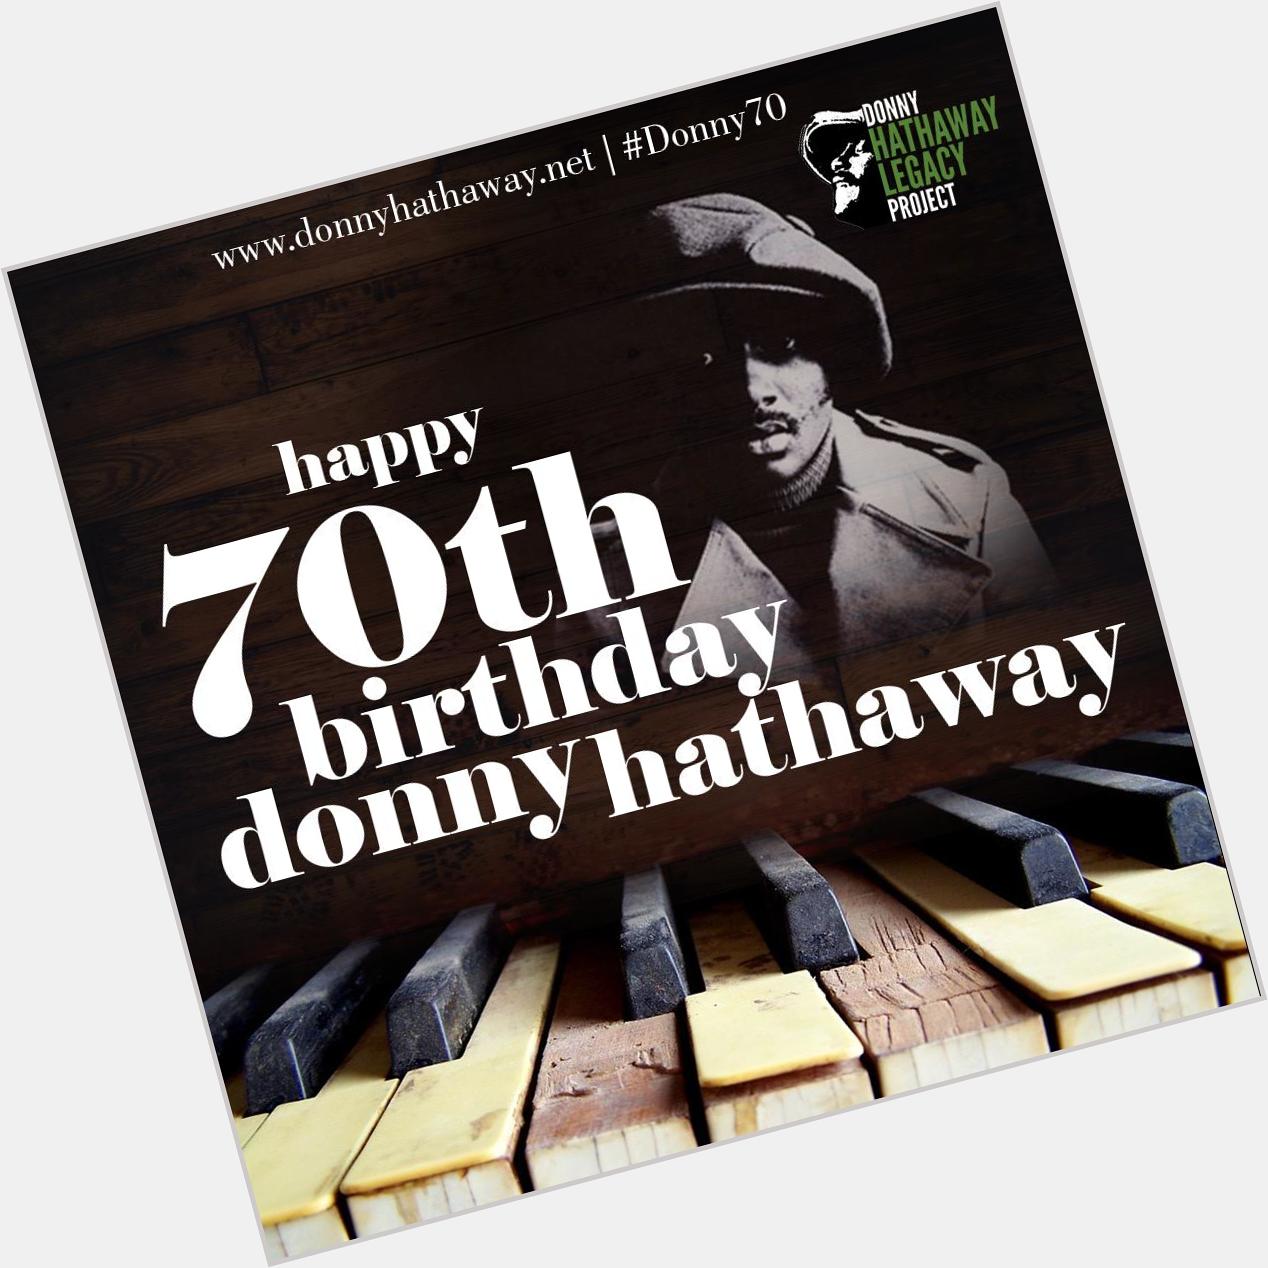 We\re so happy to celebrate Donny Hathaway today   Happy birthday daddy! 